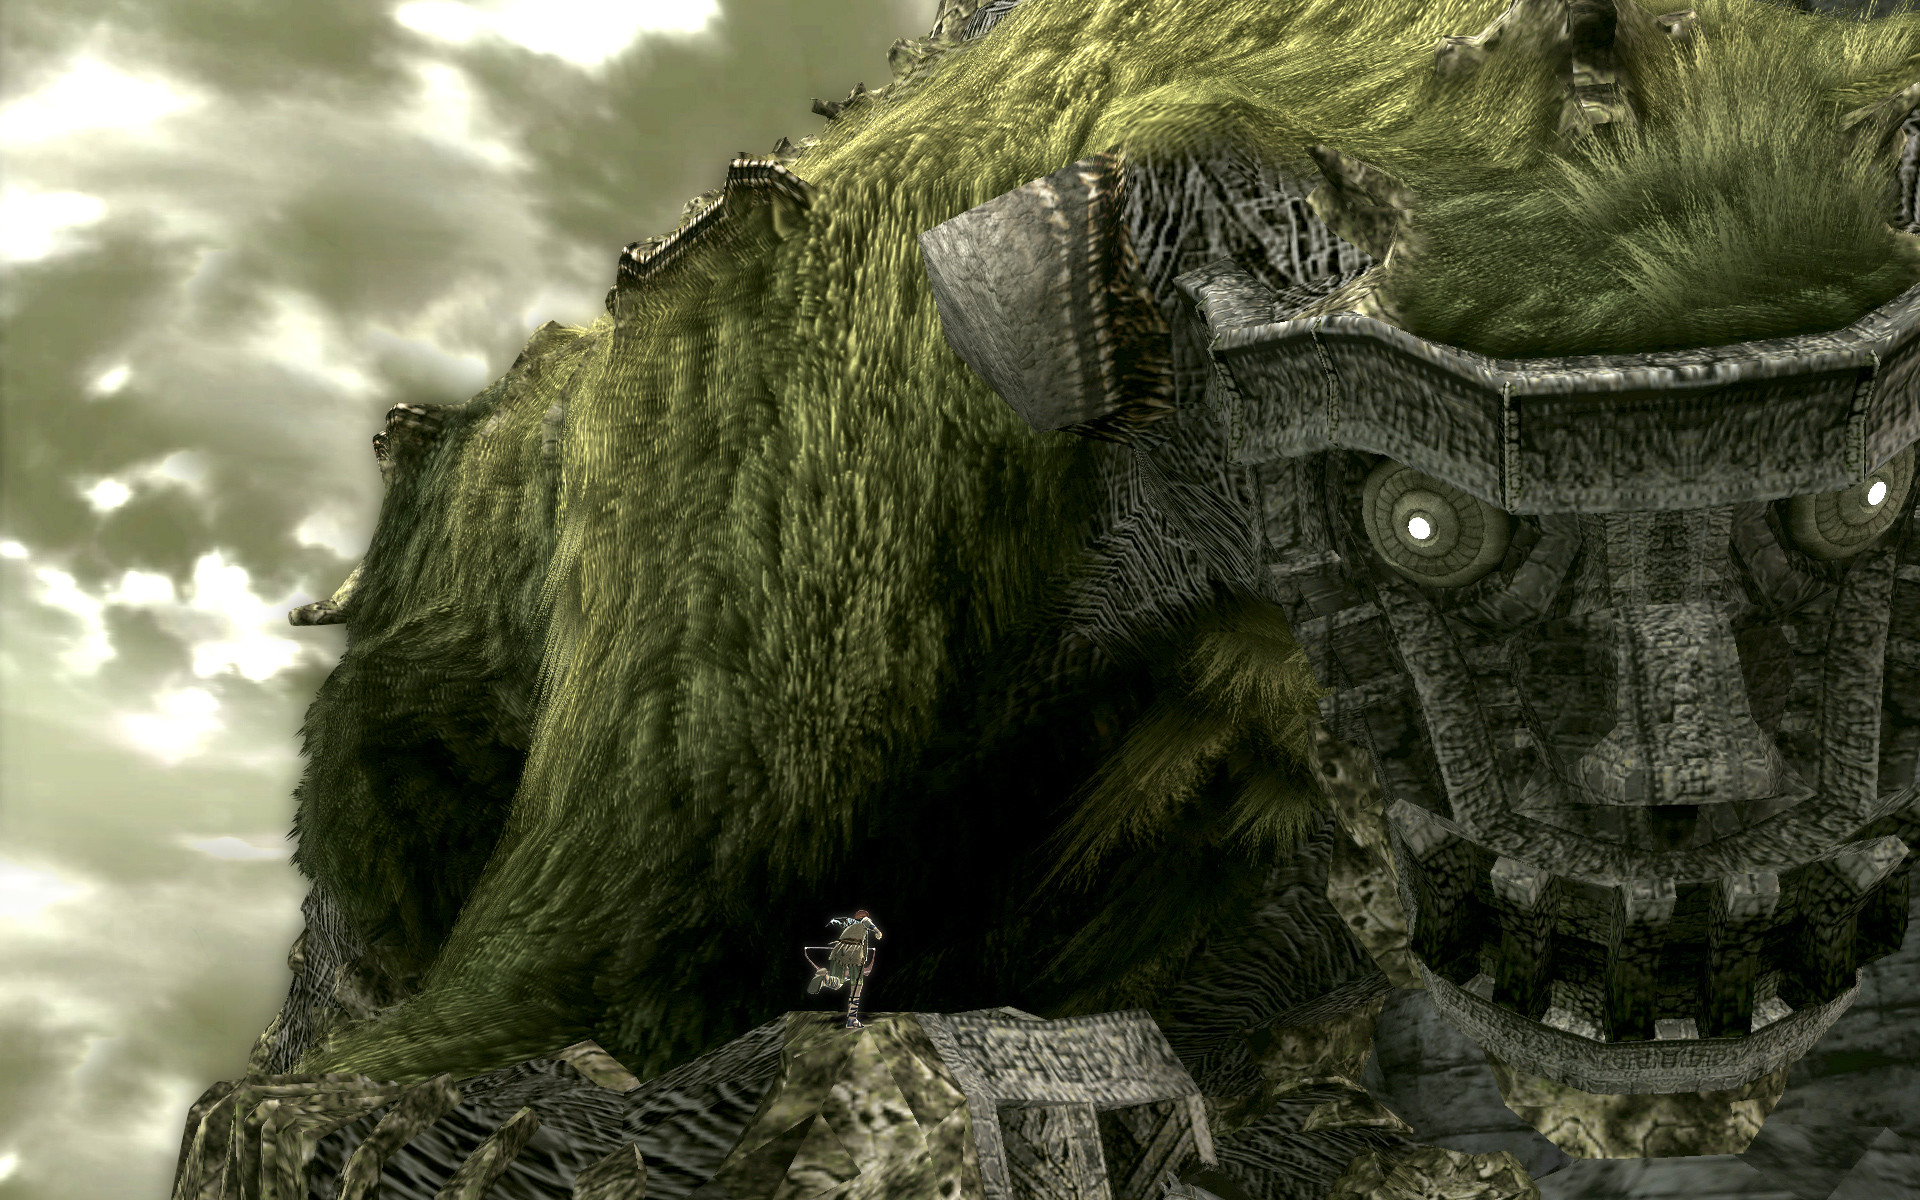 1920x1200 Video Game - Shadow Of The Colossus Wallpaper